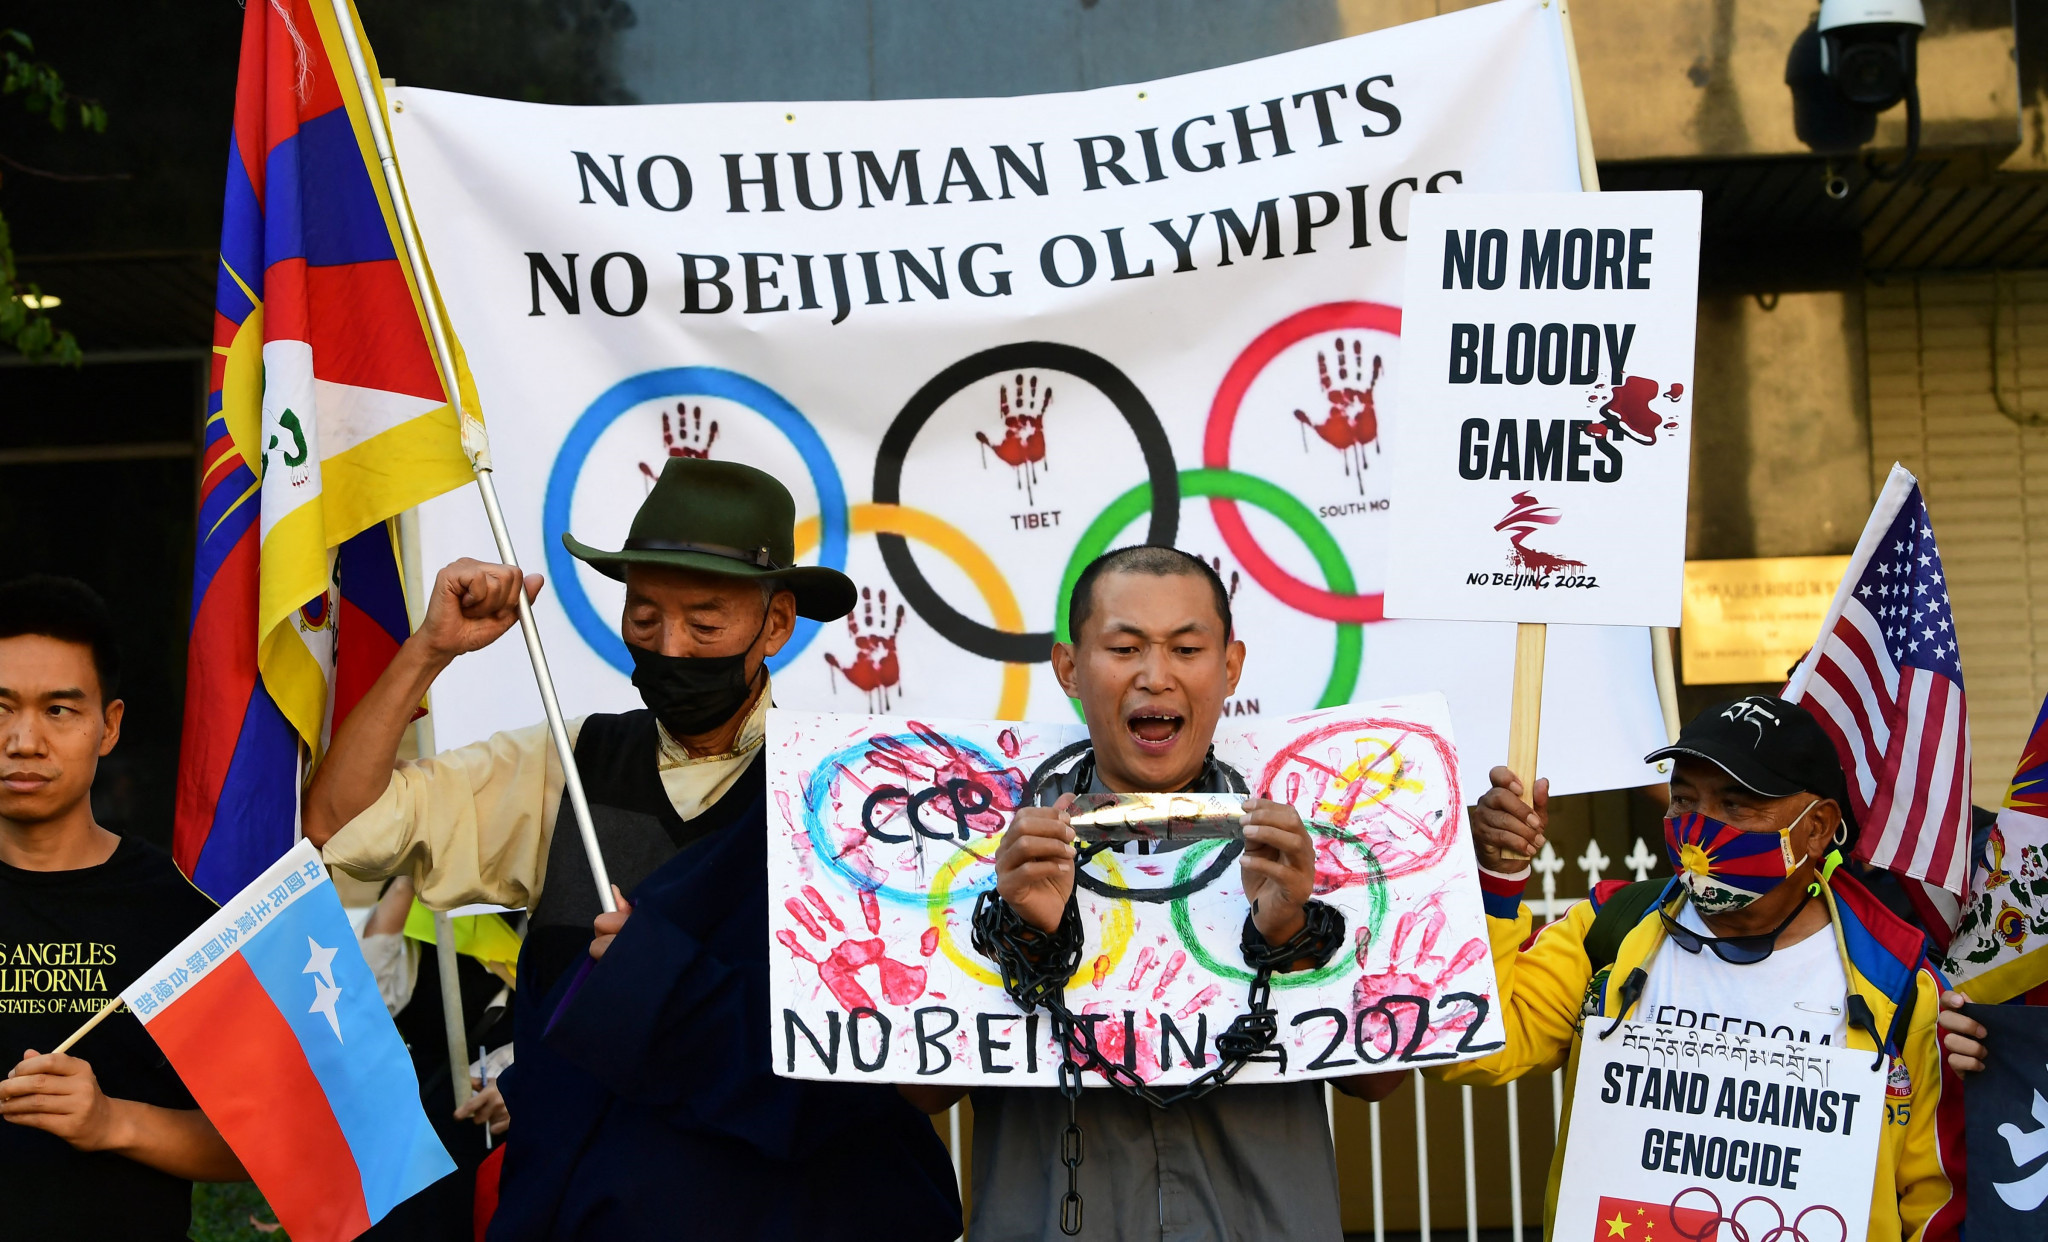 Protests have been rampant from human rights groups against the Beijing 2022 Olympics ©Getty Images